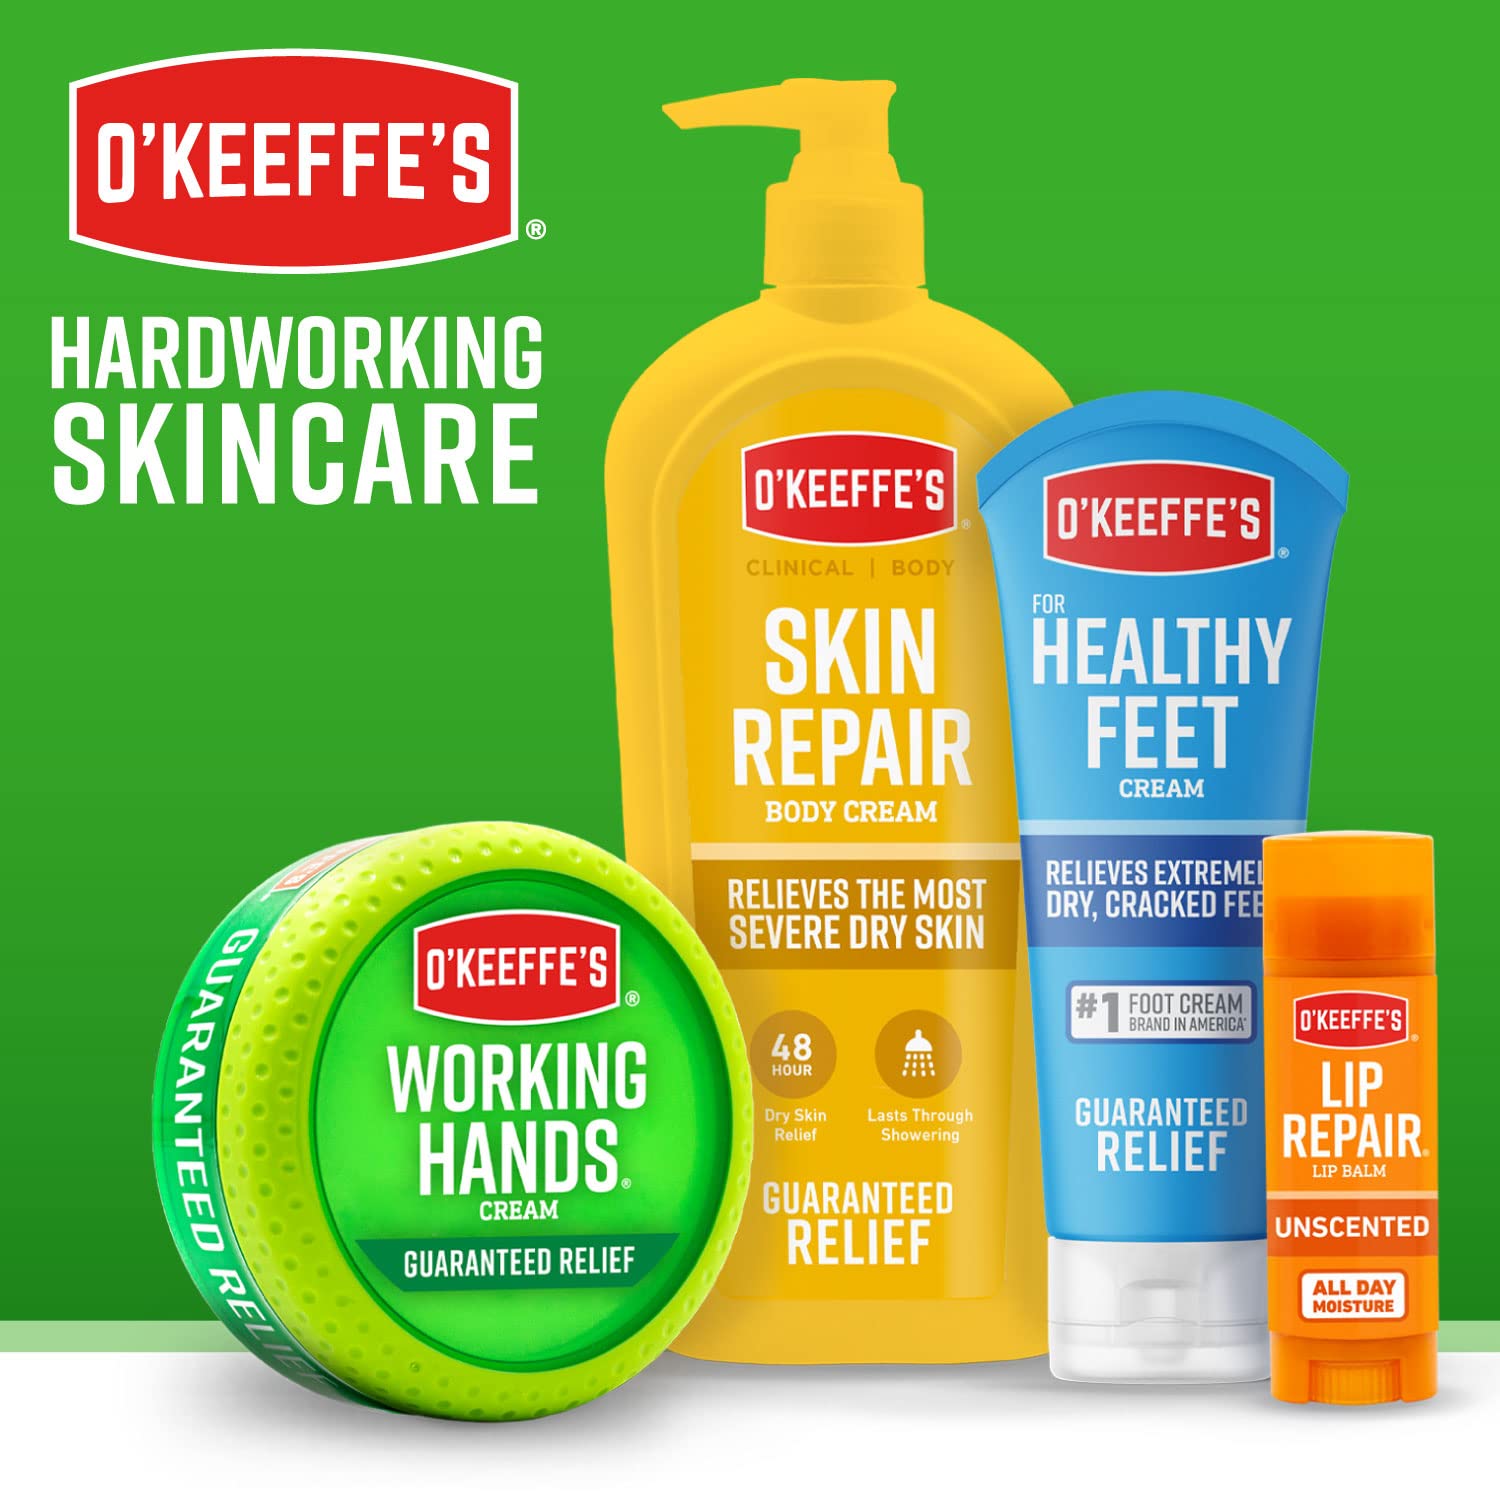 O'Keeffe's Skin Repair Body Lotion and Dry Skin Moisturizer, 3.0 Ounce Tube : Beauty & Personal Care